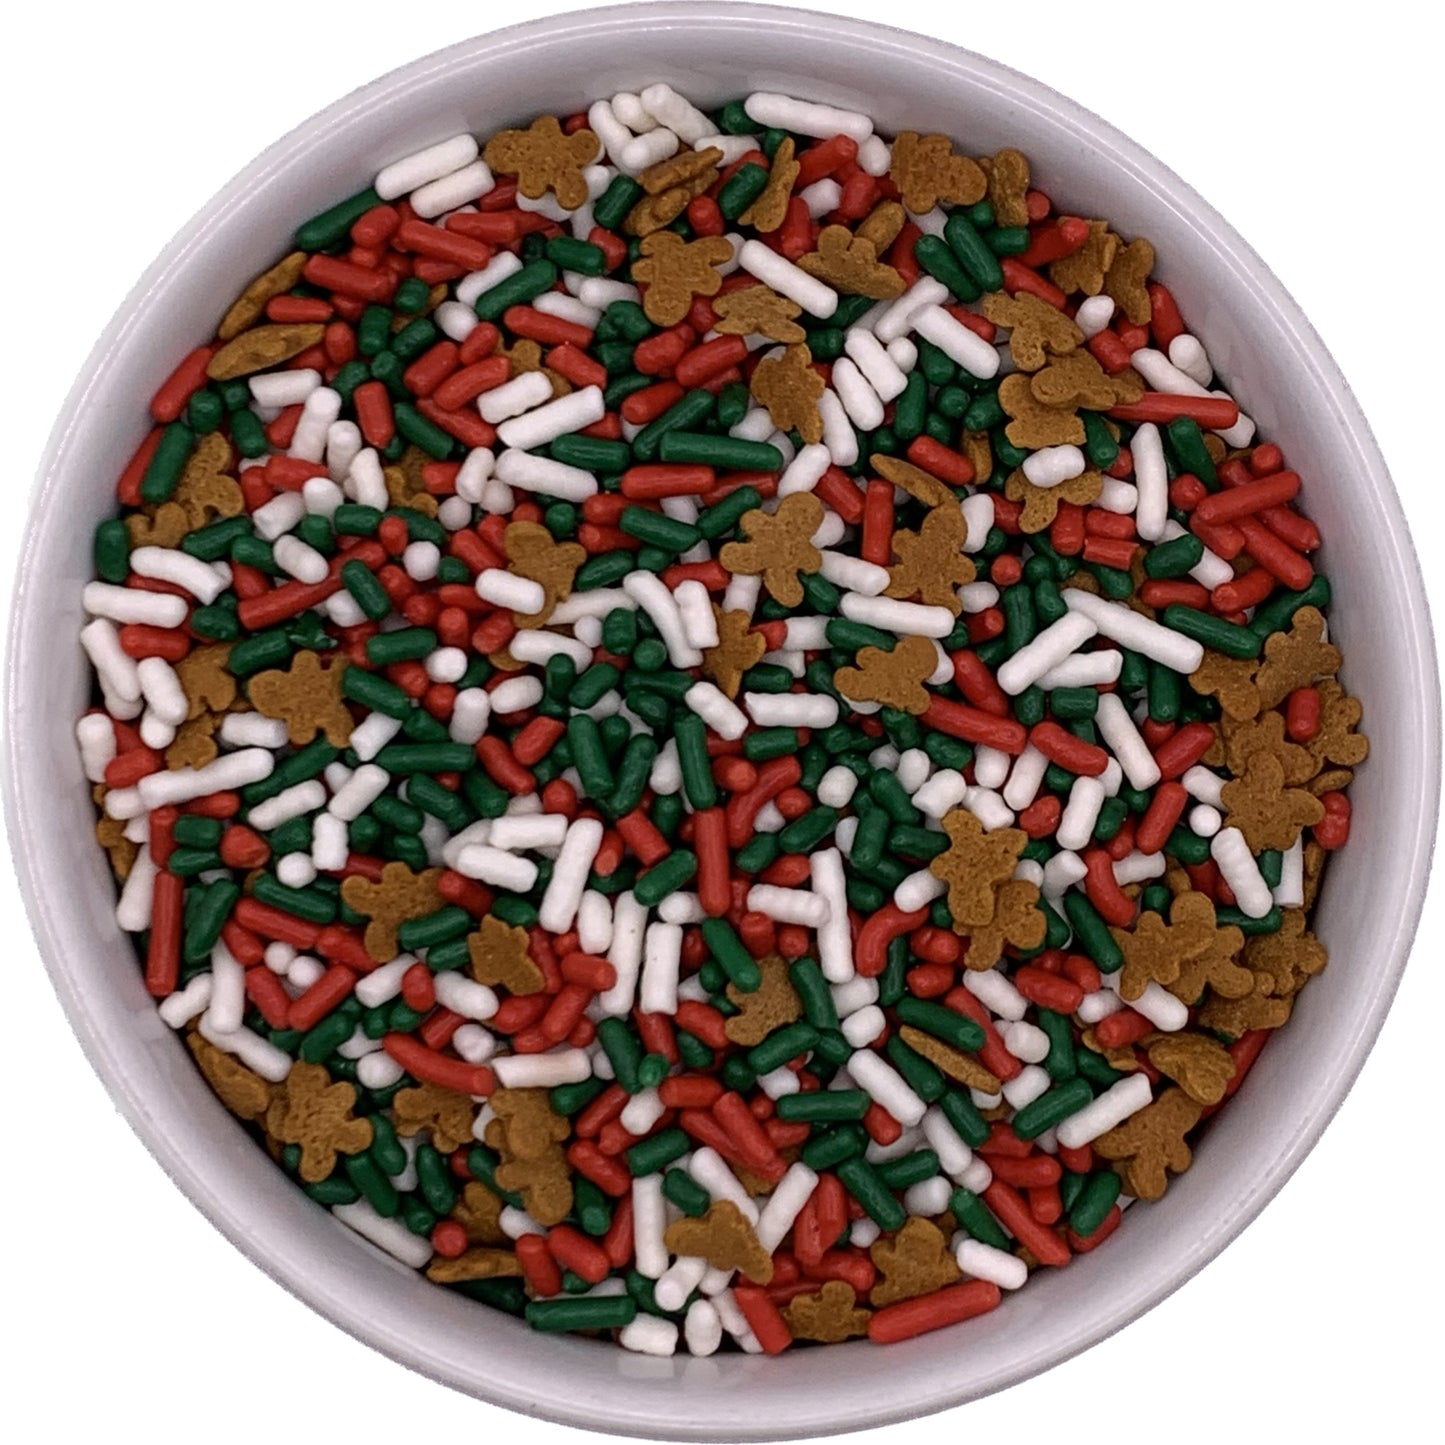 Gingerbread Jimmie Blend with Red and White Sprinkles